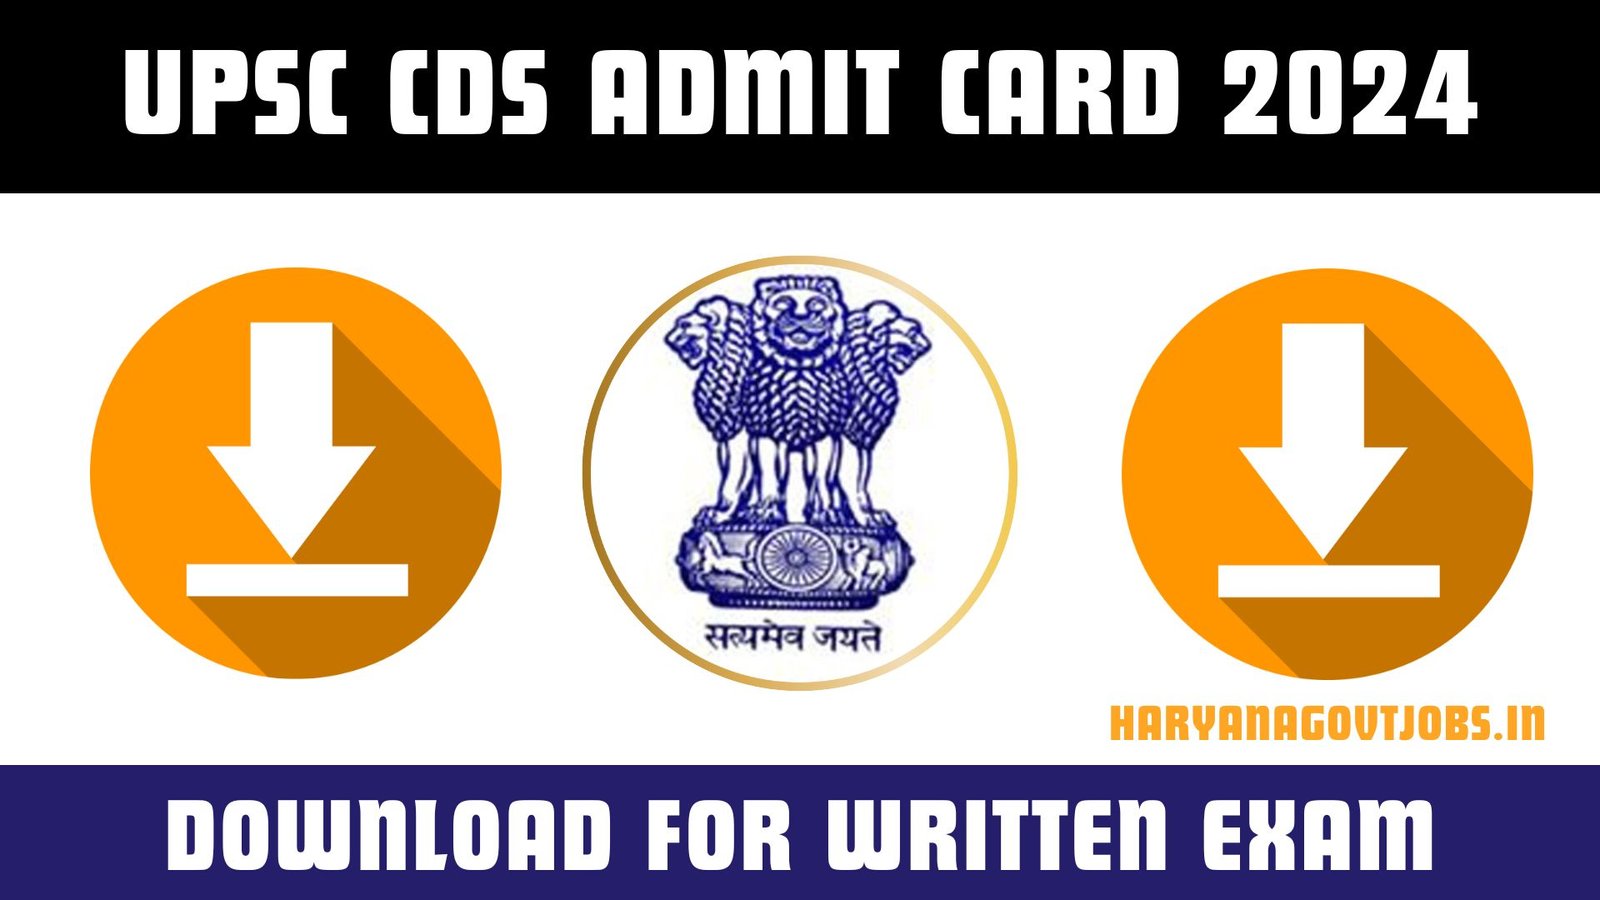 UPSC CDS Admit Card 2024 Overview